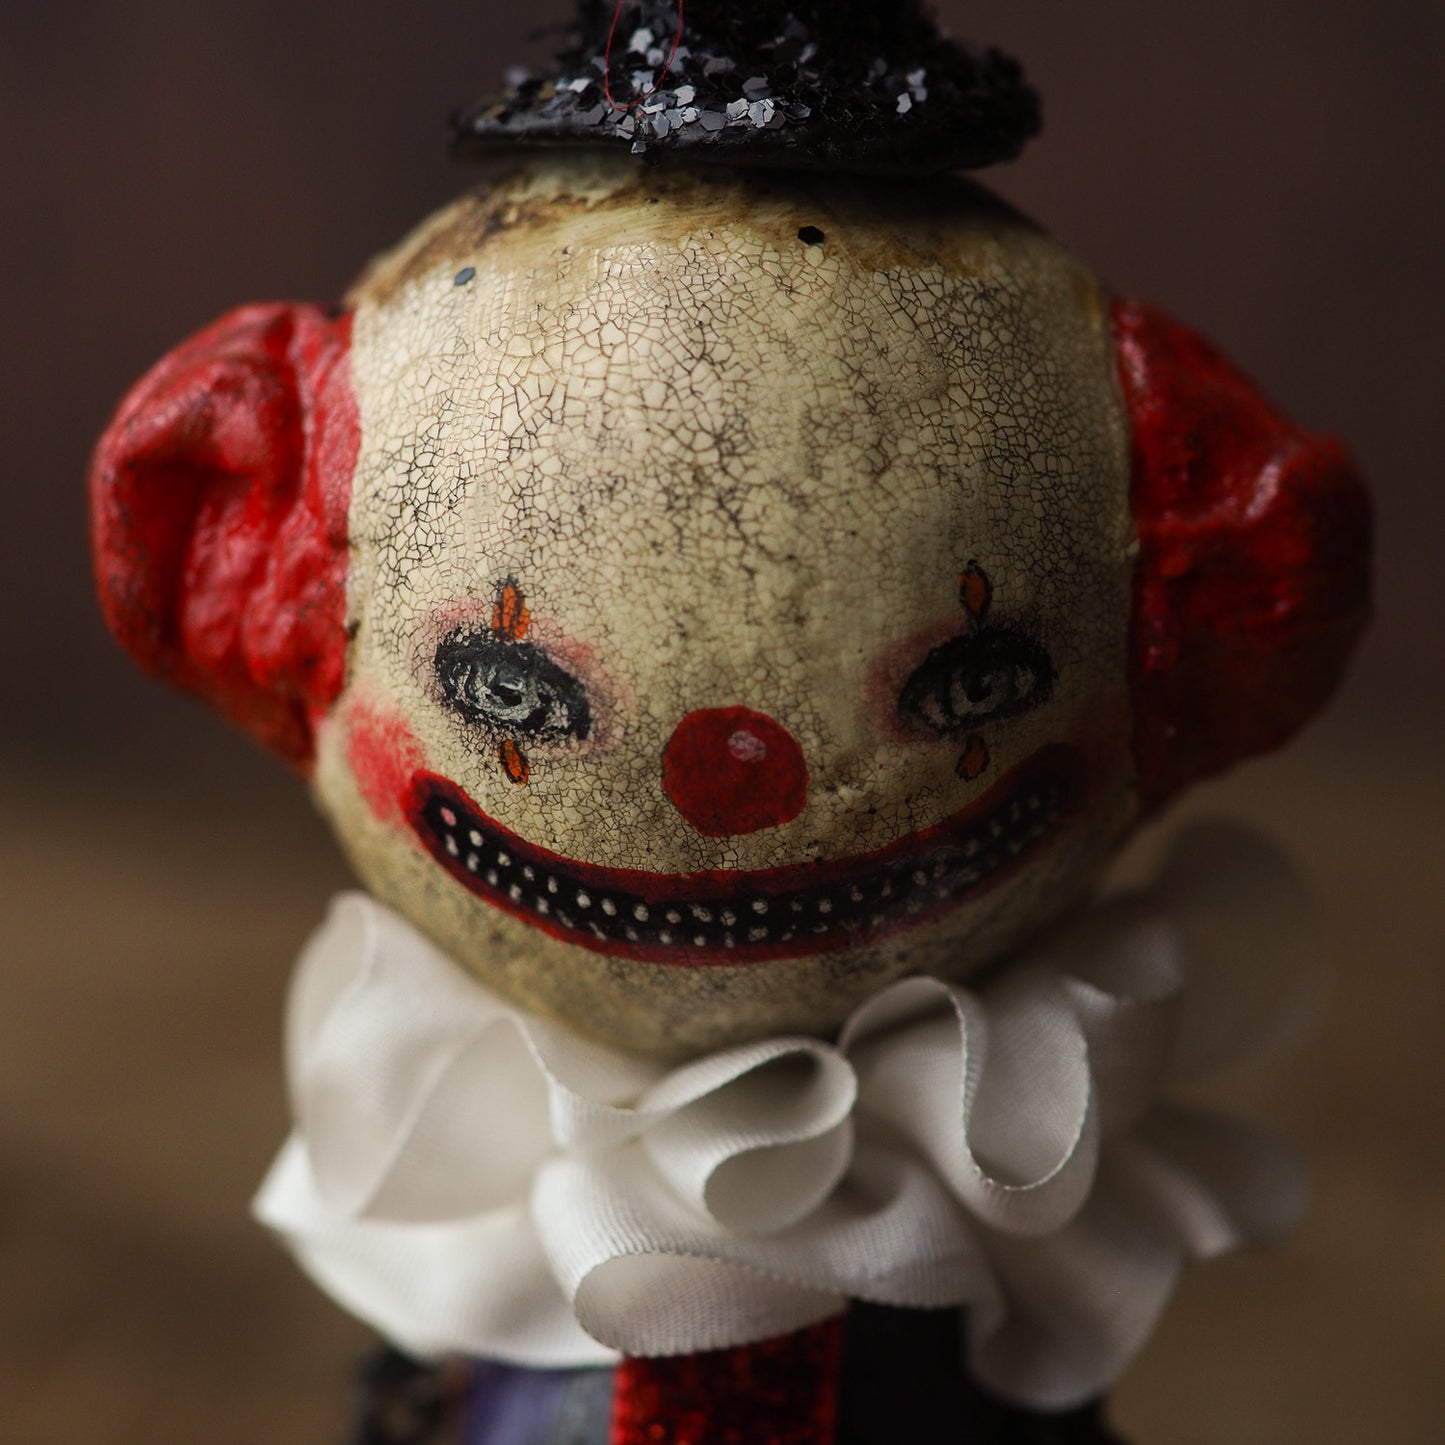 Original Halloween art doll original creation by Danita Art. Paper Clay, sculpted and painted in a spooky whimsical unique work of art. Clown IT Pennywise Evil.